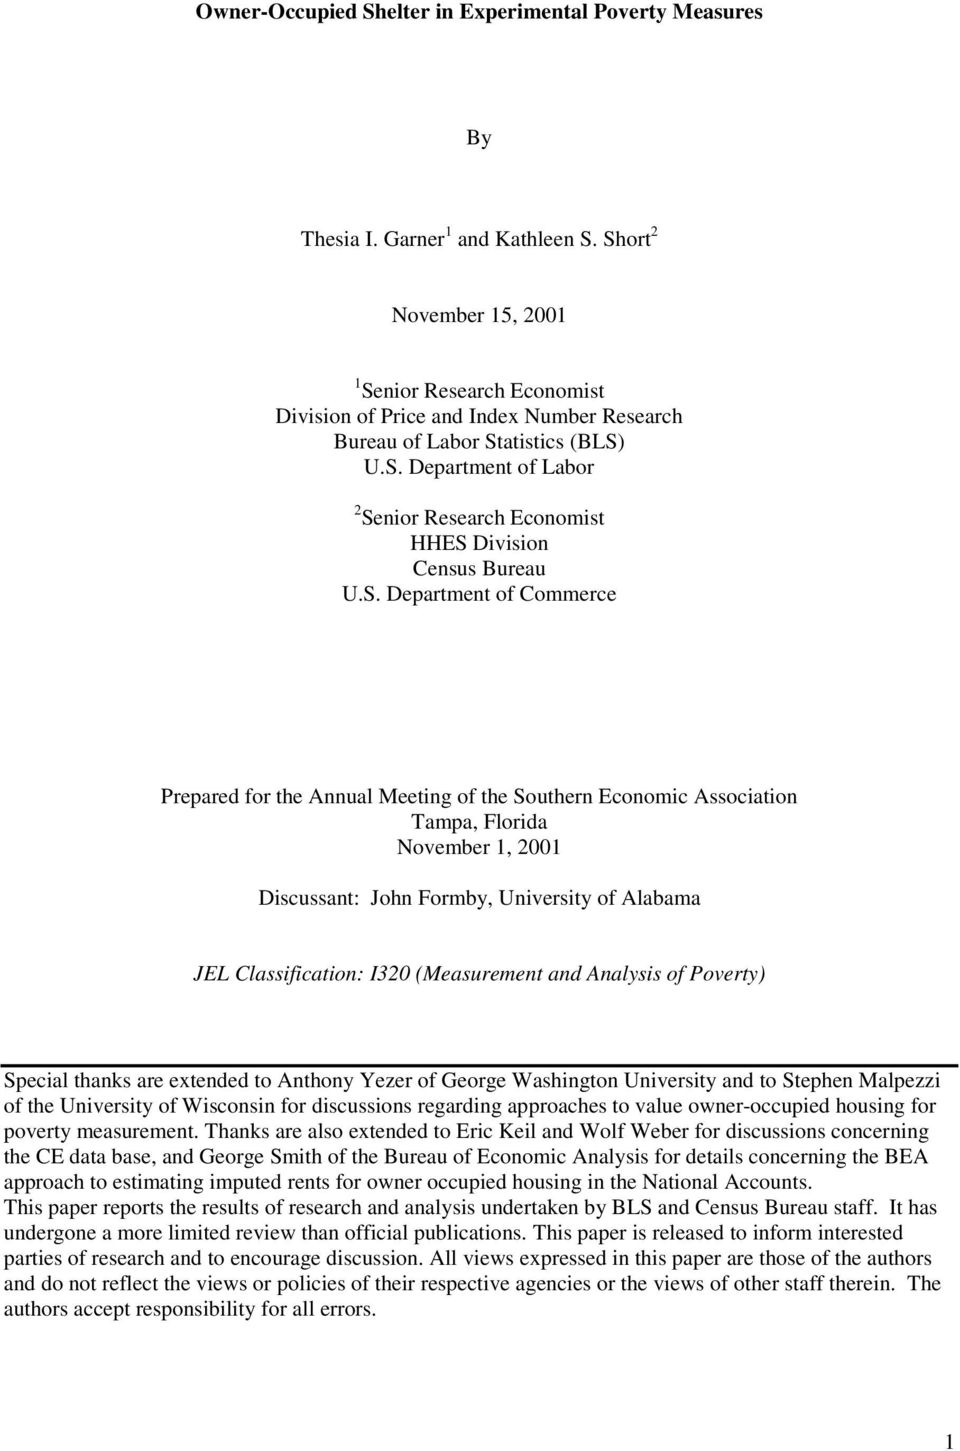 S. Department of Commerce Prepared for the Annual Meeting of the Southern Economic Association Tampa, Florida November 1, 2001 Discussant: John Formby, University of Alabama JEL Classification: I320